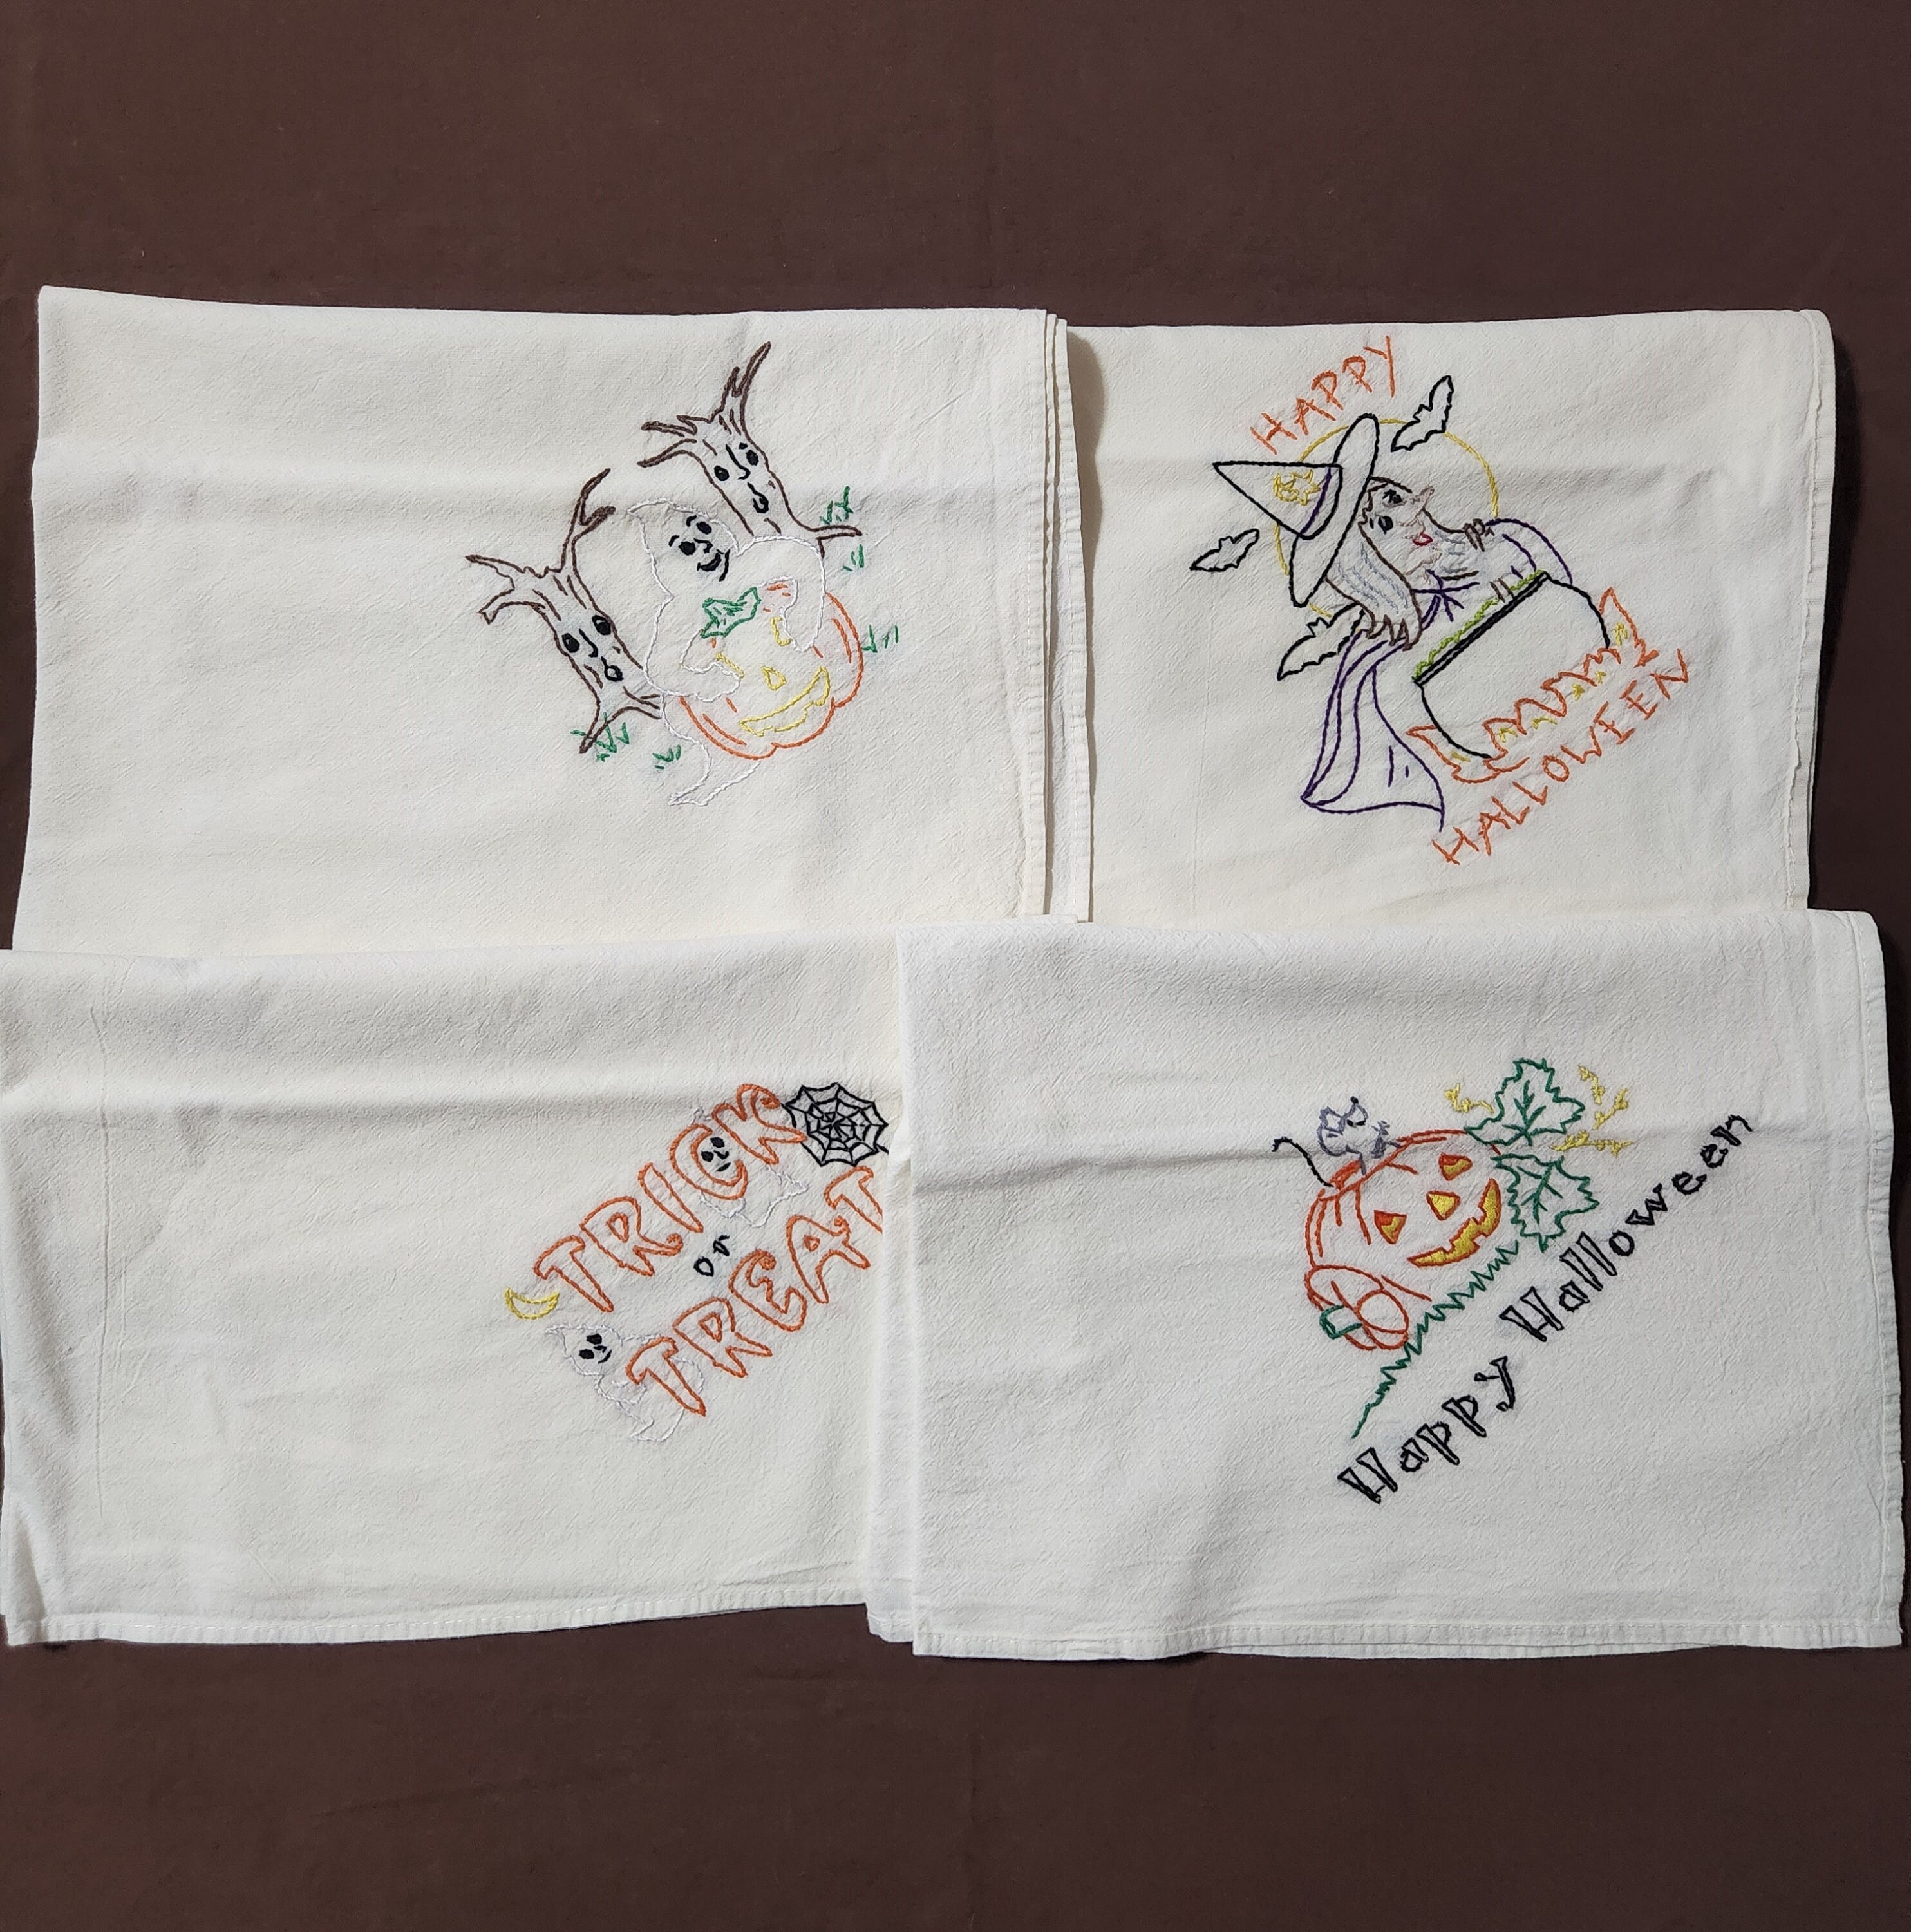 Goth Halloween Embroidered Flour Sack Towels - SET OF 4